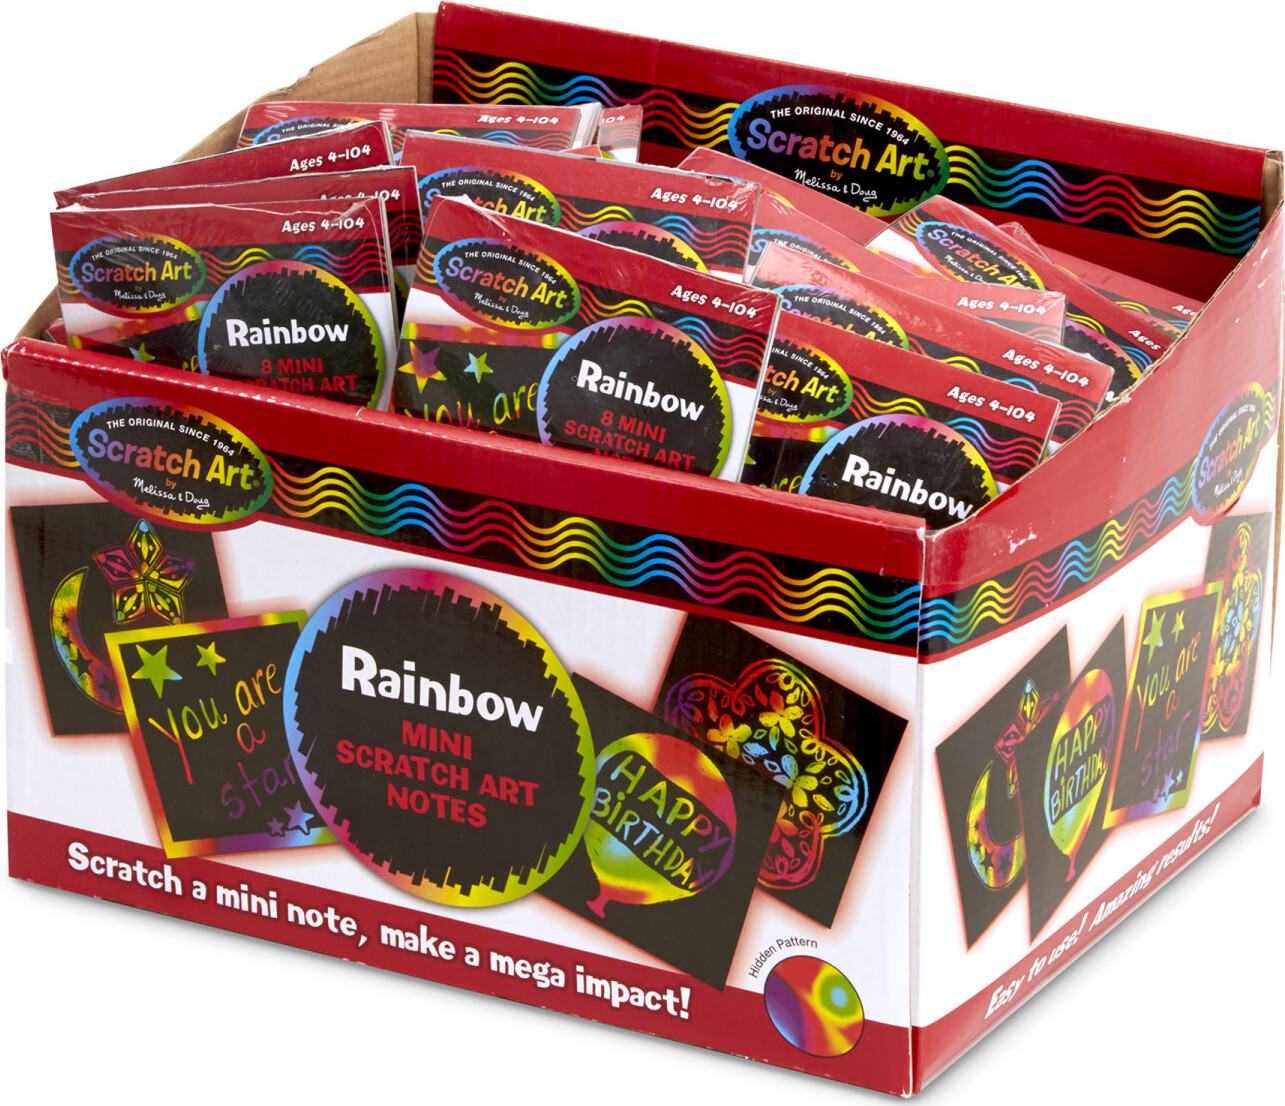 Scratch Art Box of Rainbow Mini Notes - Toys To Love